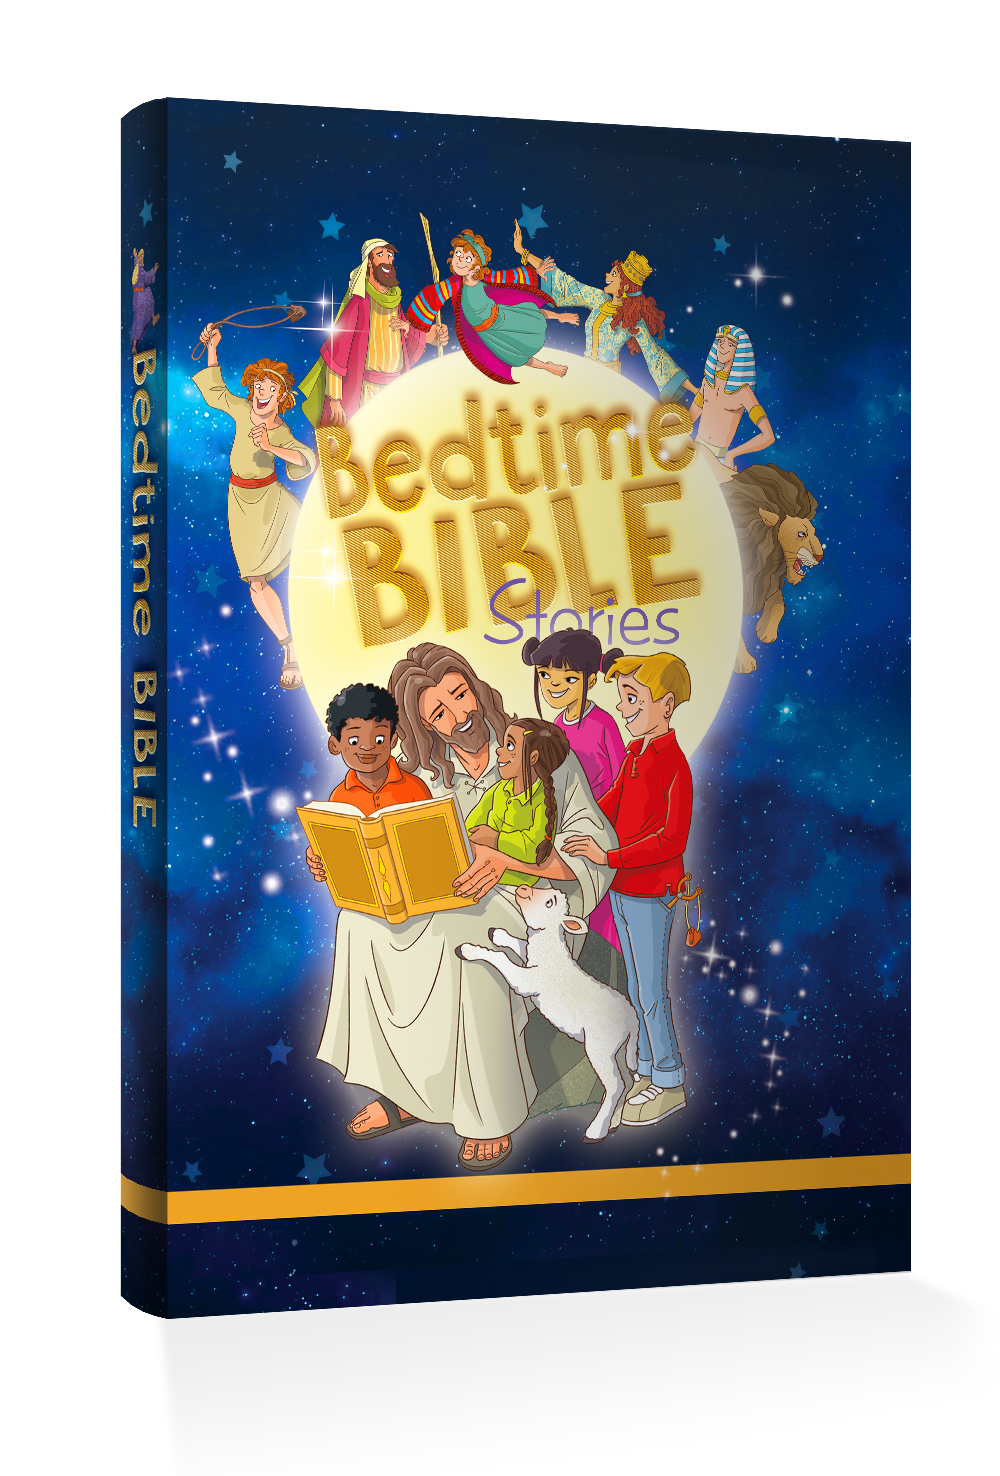 Bedtime Bible Stories Cover